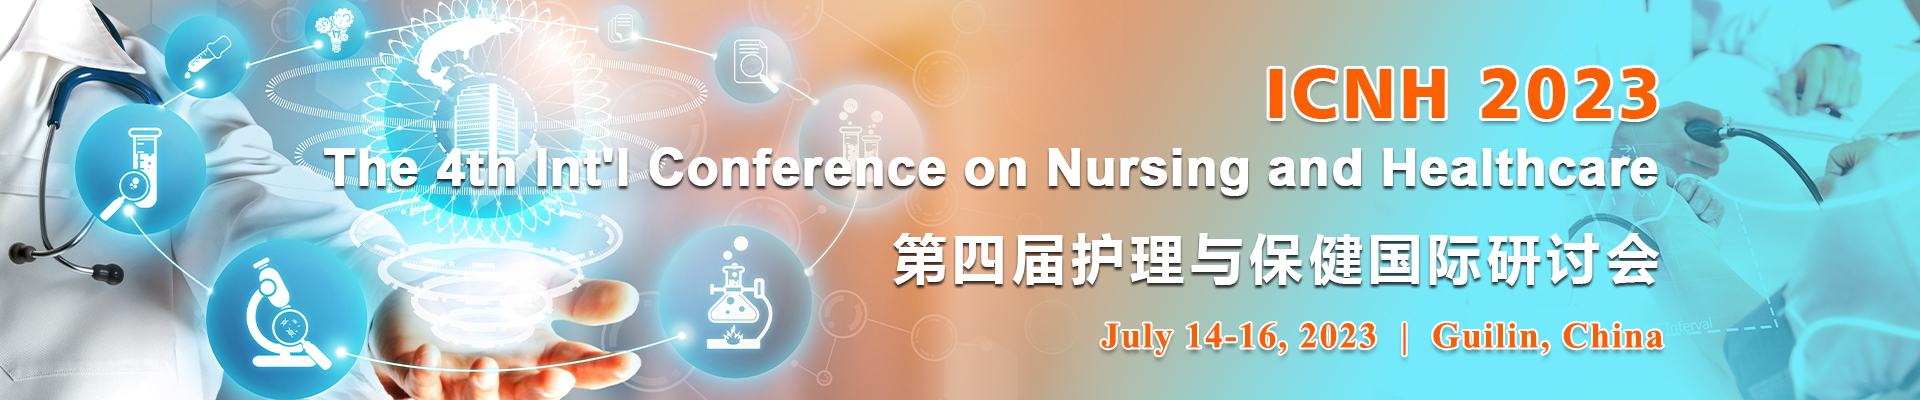 The 4th Int'l Conference on Nursing and Healthcare (ICNH 2023), Guilin, Guangxi, China